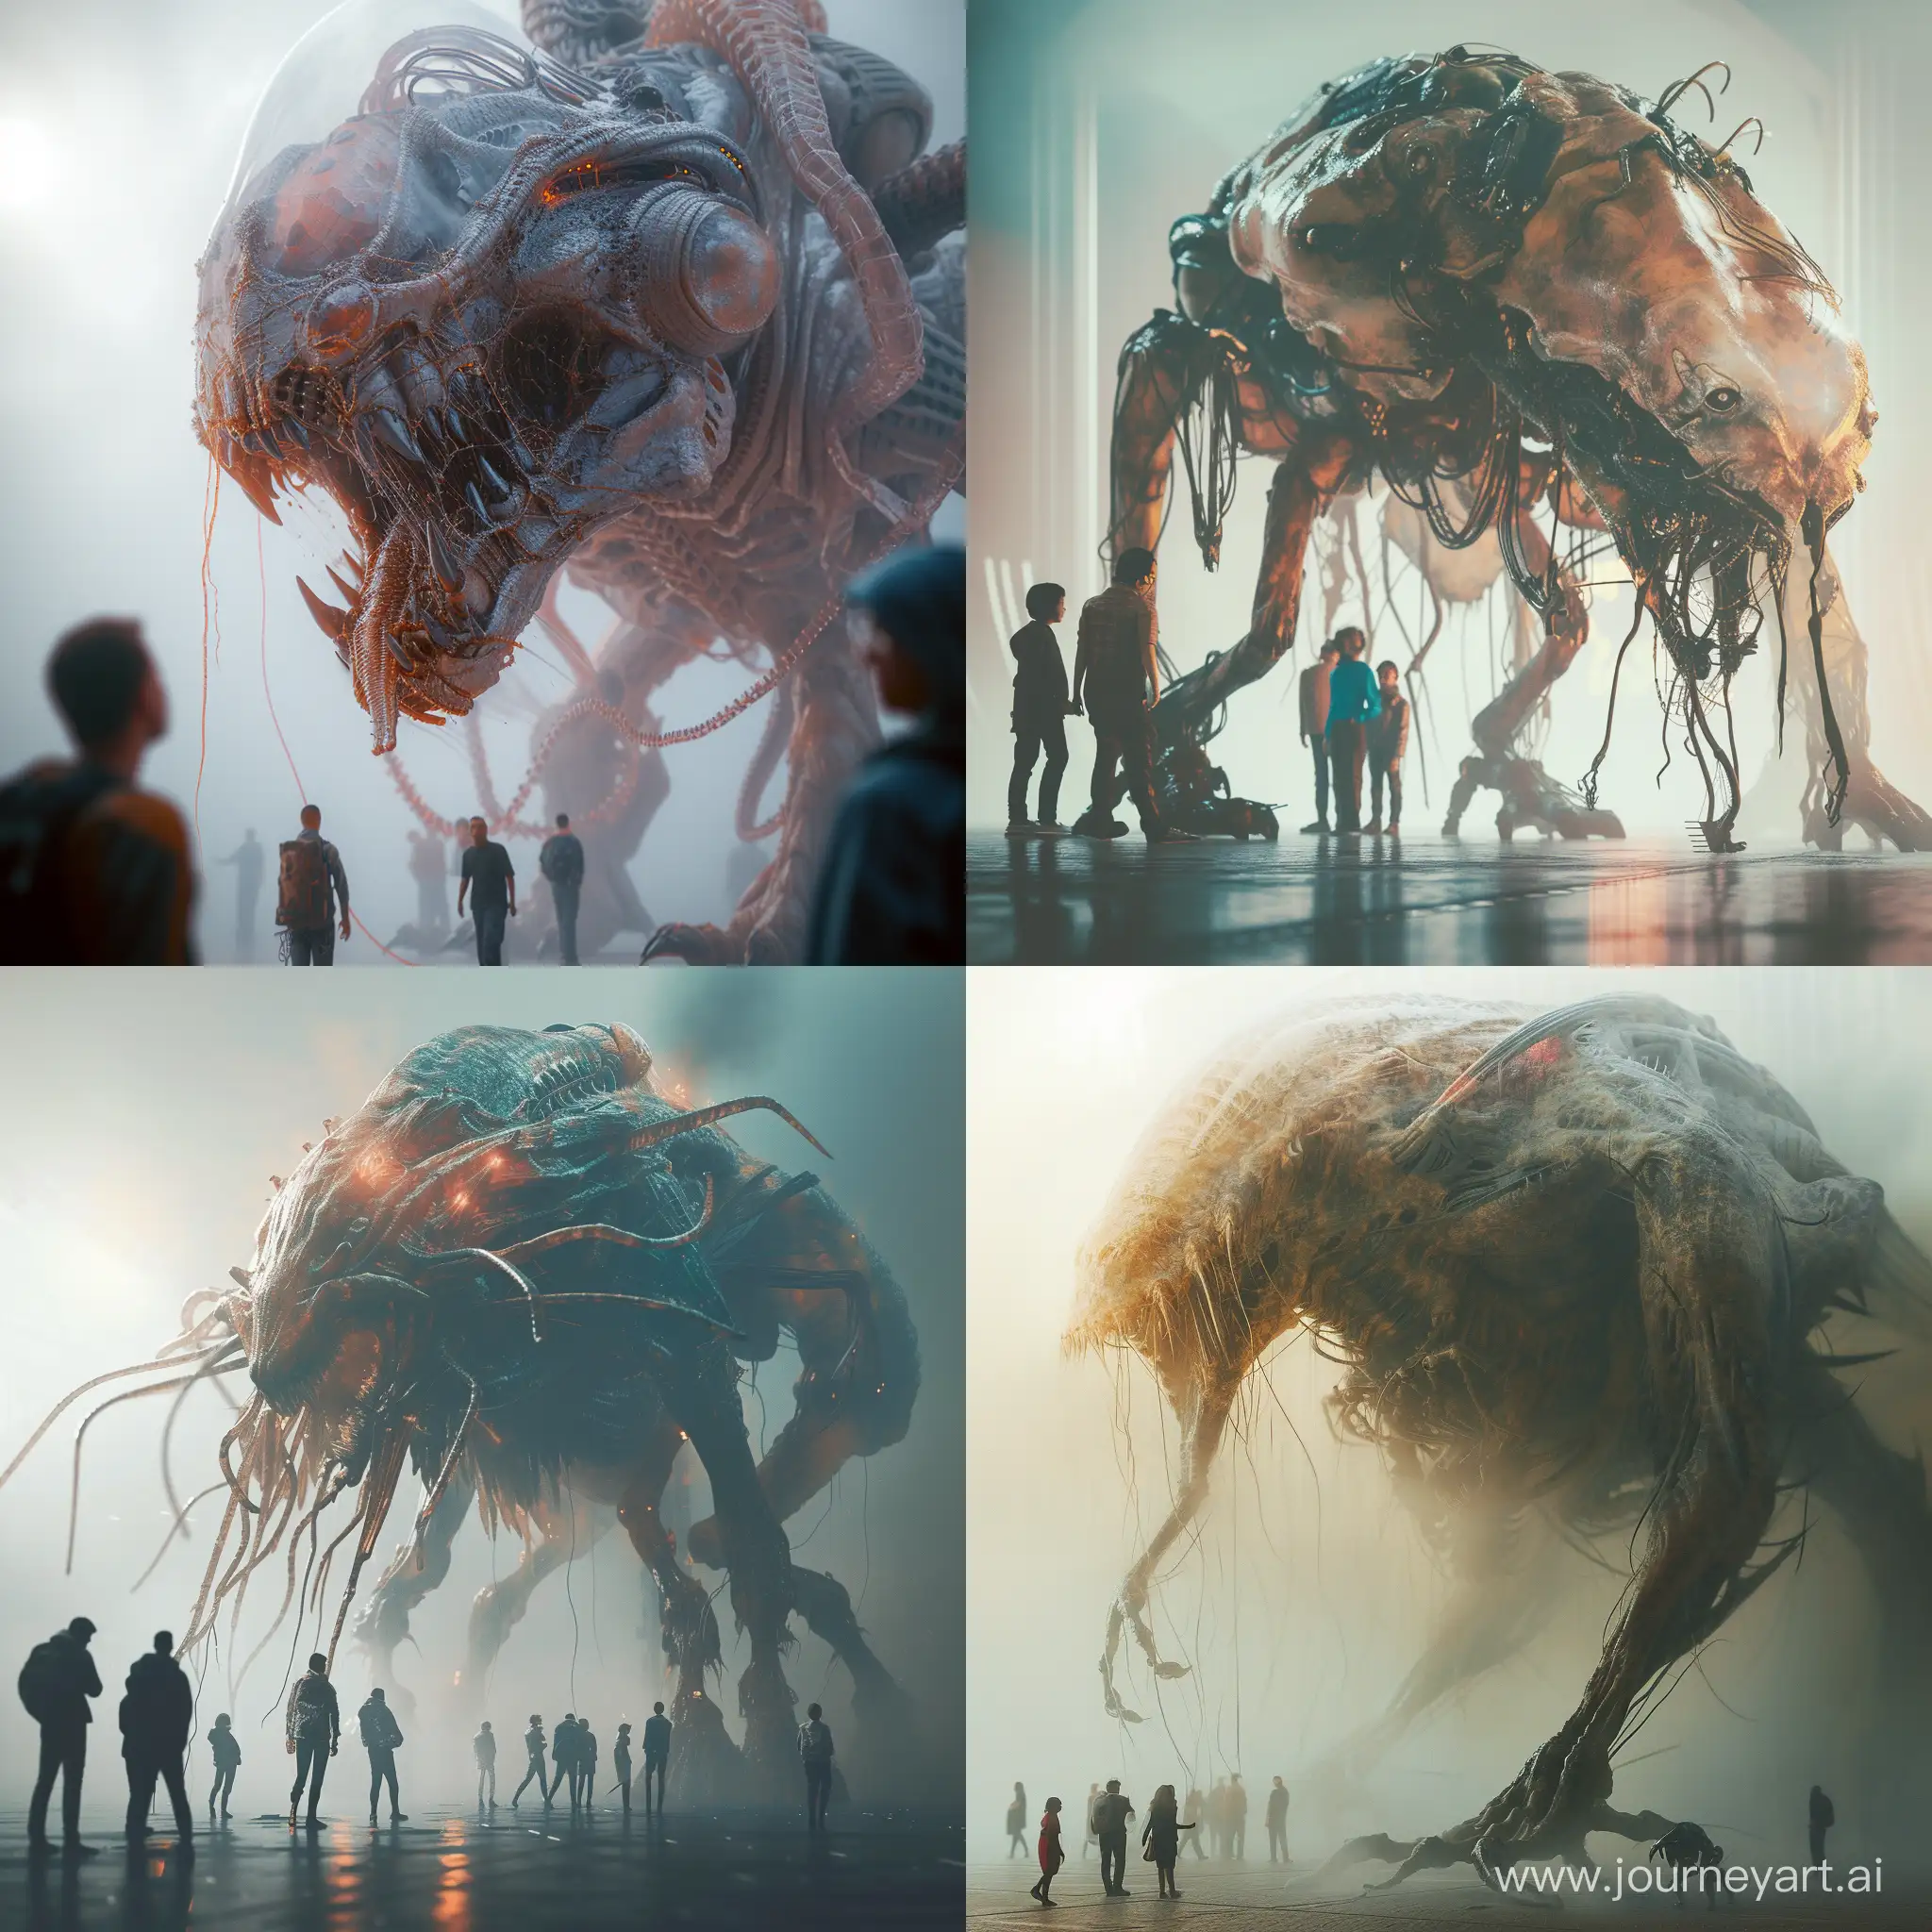 creat hyperrealistic image inspired by the works of Dariusz Zawadzki, featuring a hyper-detailed creature with some people added. The image is a creat hyper-detailed photograph with soft lighting. The background environment is inspired by the concepts of Michael Whelan. The scene is set in a sci-fi
